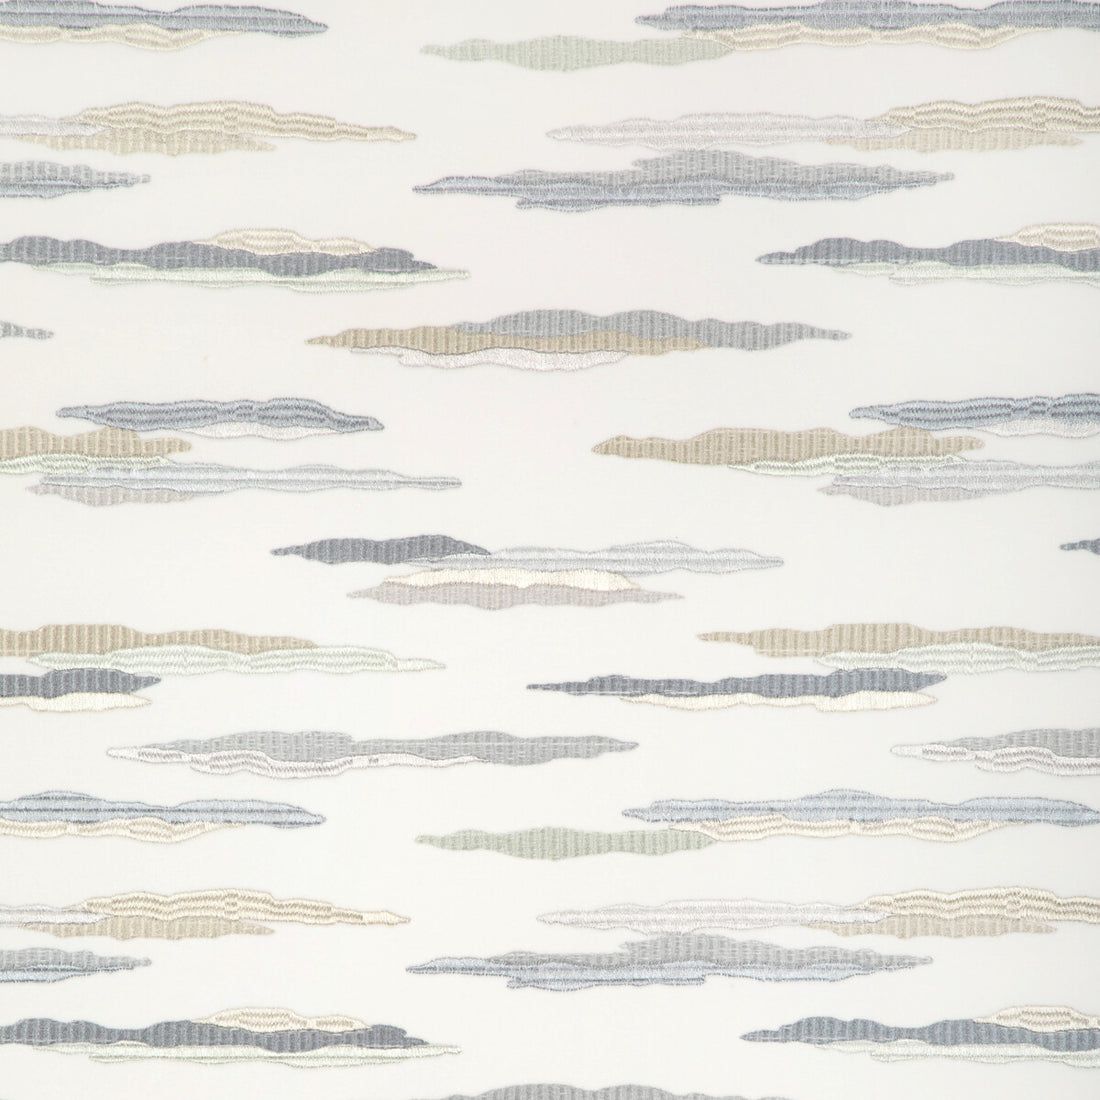 Constant Motion fabric in mineral color - pattern 36819.15.0 - by Kravet Design in the Candice Olson collection